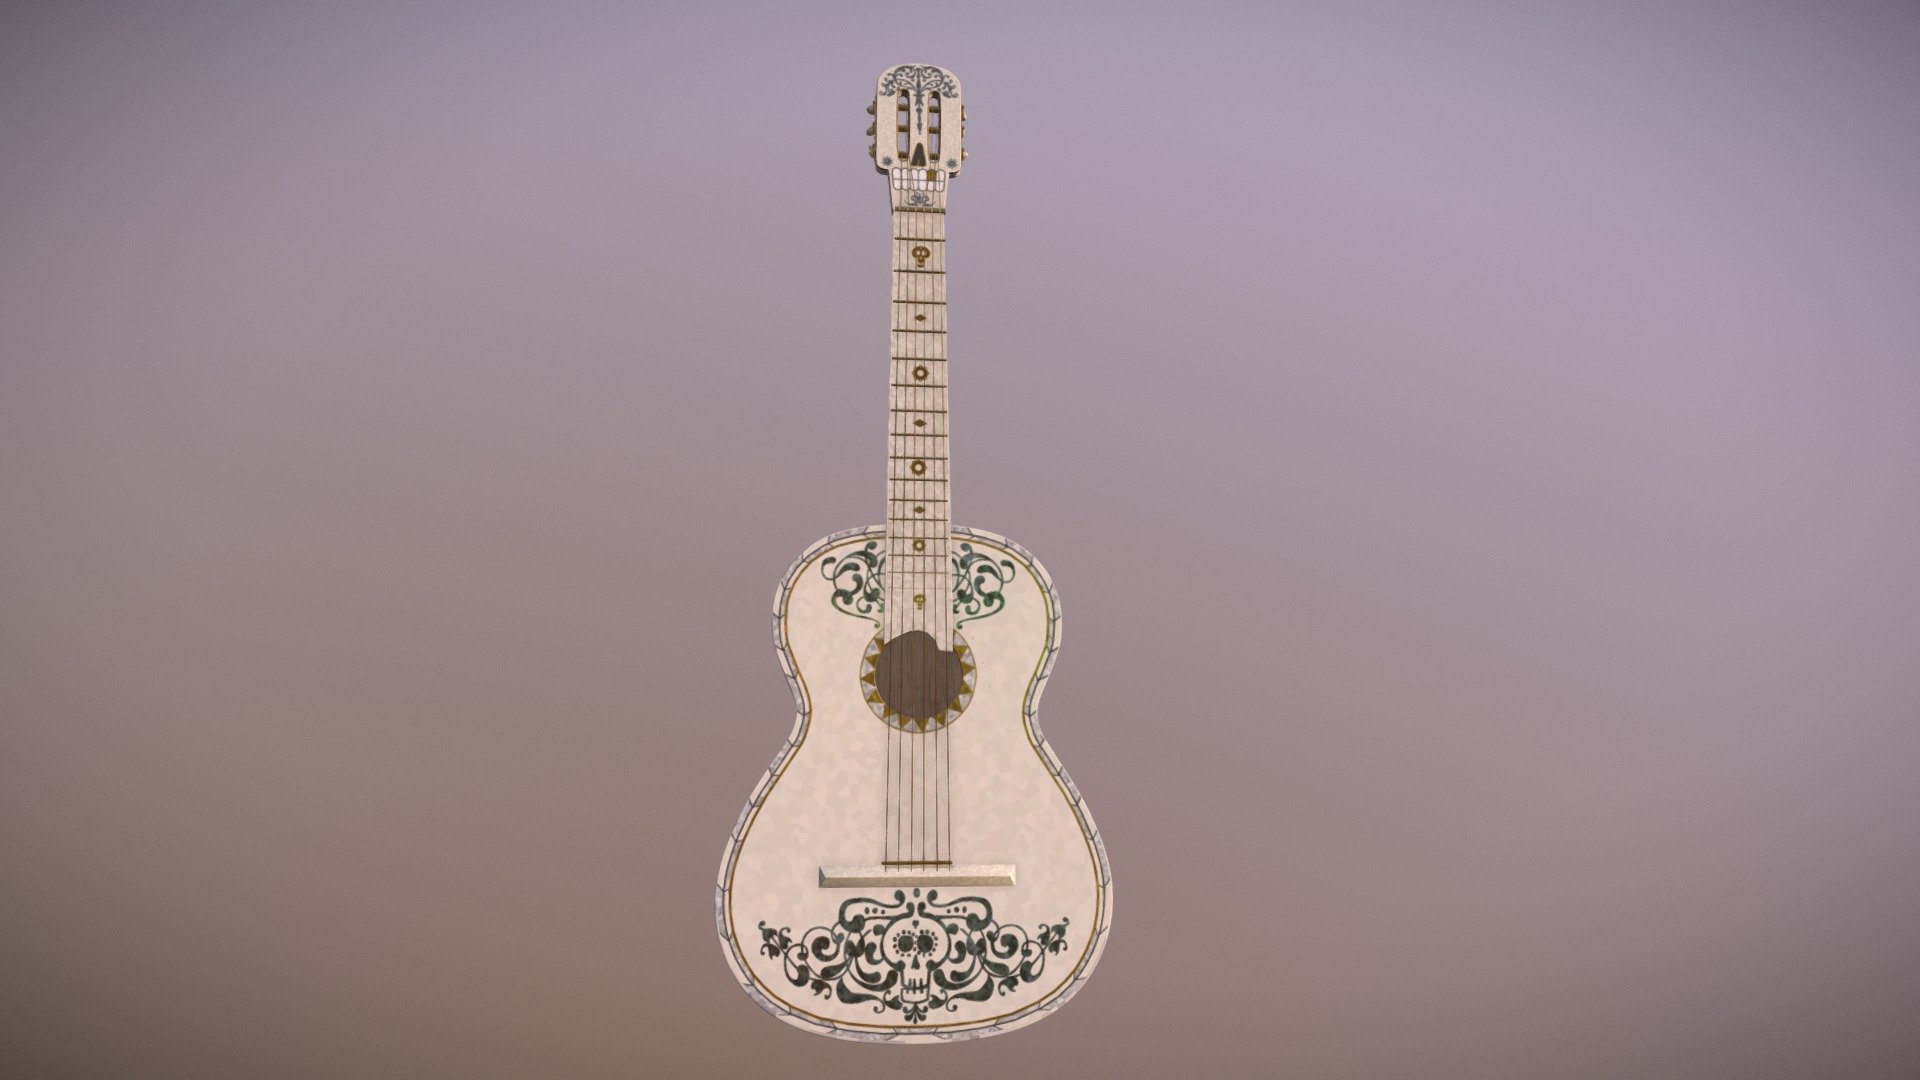 This is a fun study to make the guitar from my new favourit Pixar Coco - Ernesto de la cruz's Guitar - 3D model by oday 3d model